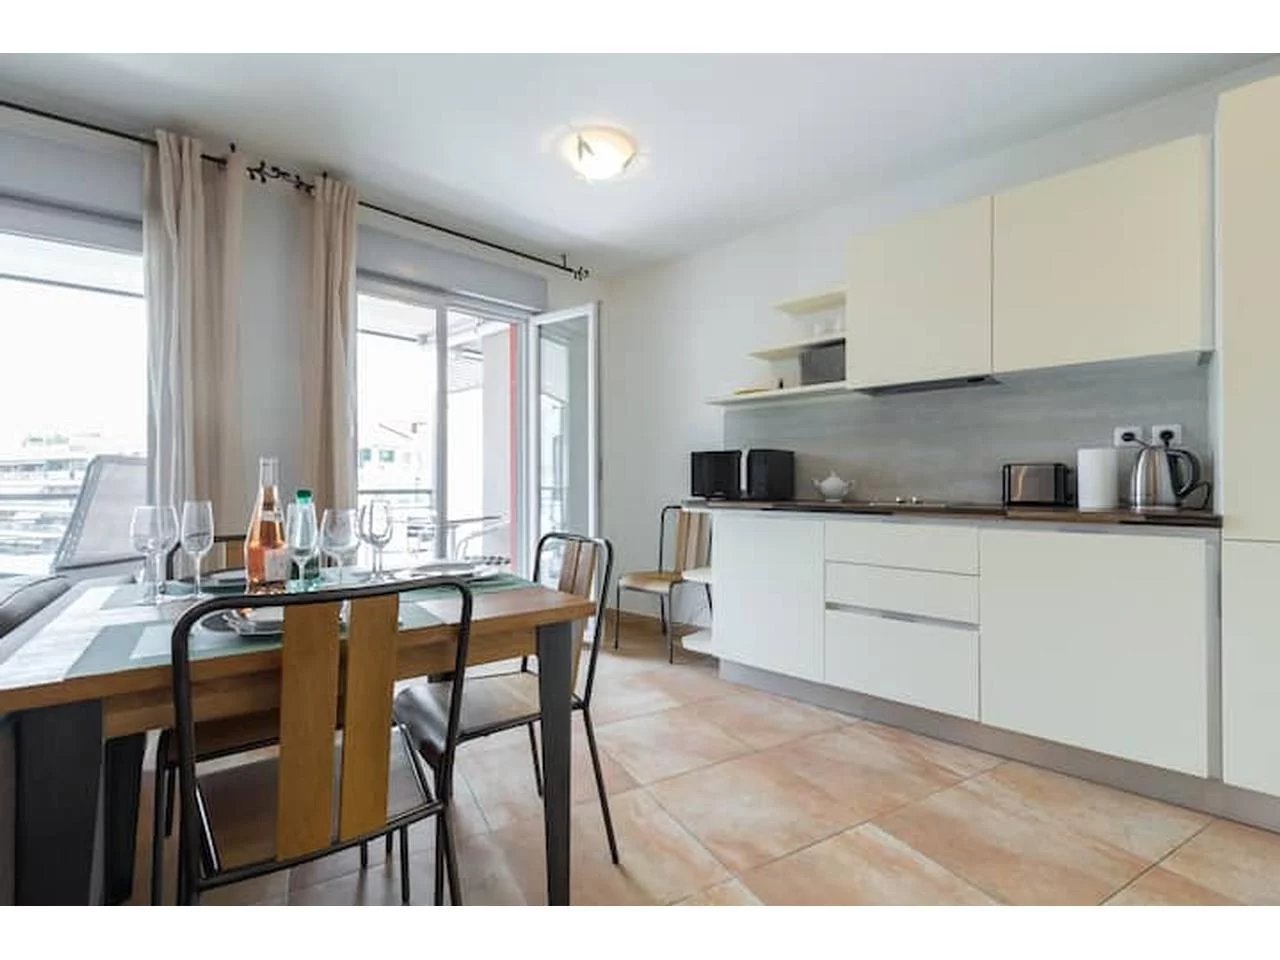 Appartement  3 Rooms 64.23m2  for sale   675 000 €